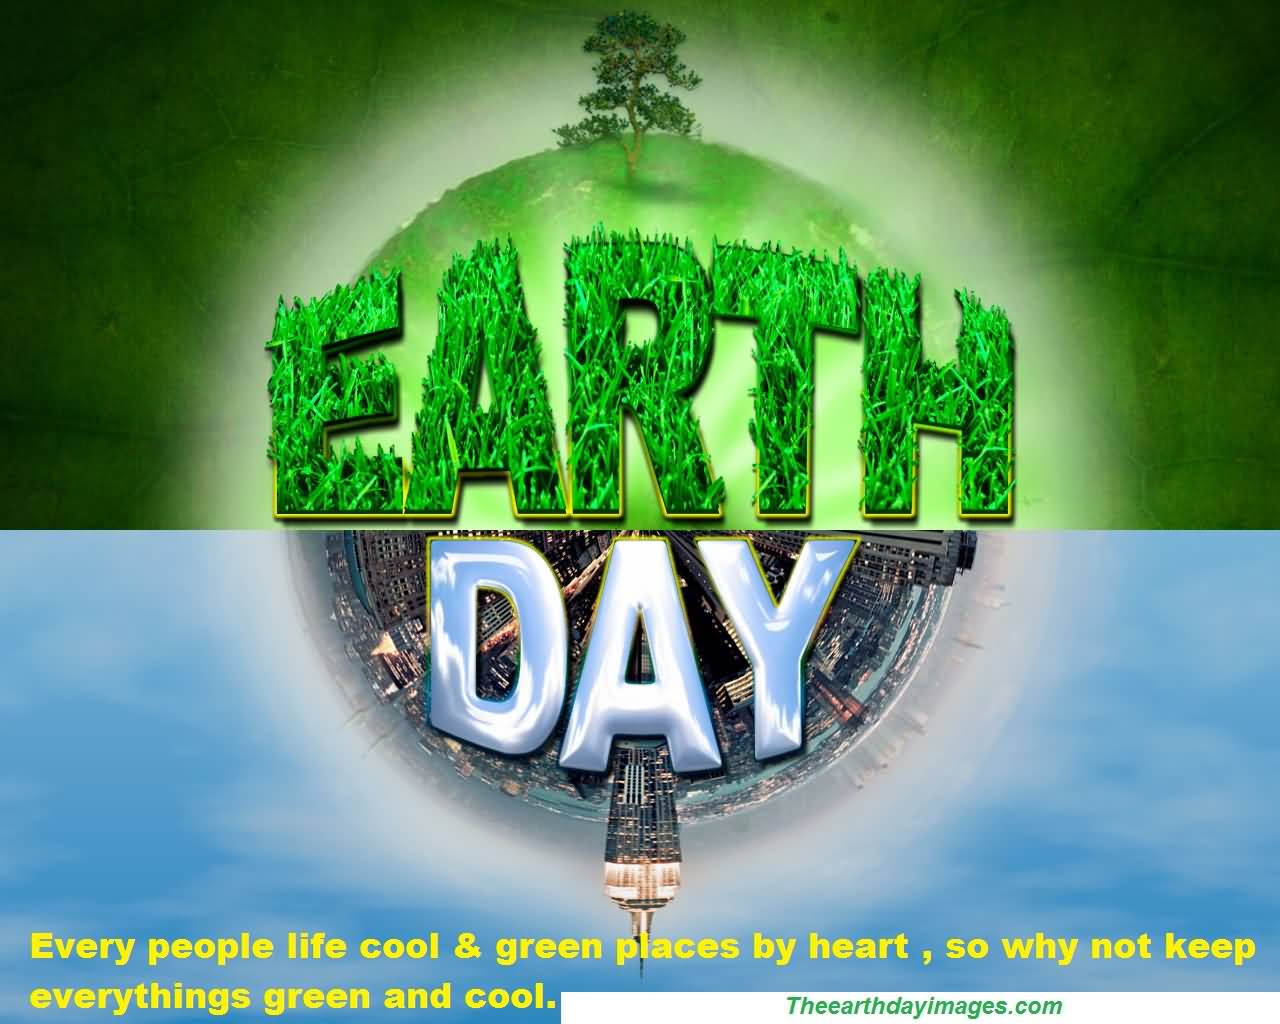 Earth Day Every People Life Cool & Green Places By Heart, So Why Not Keep Everything's Green And Cool